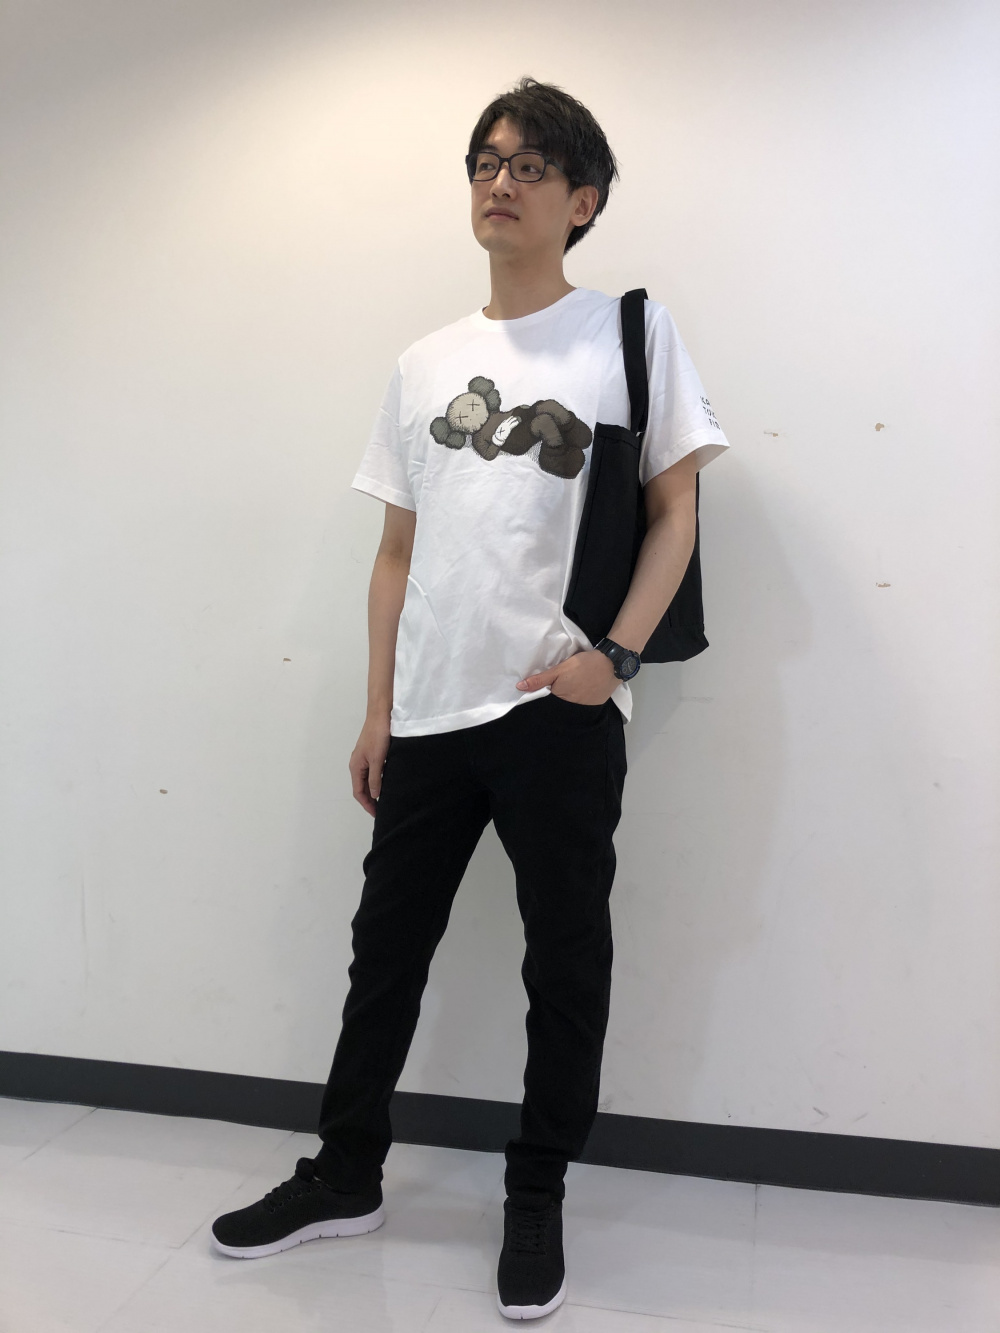 Check styling ideas for「Tote Bag UNIQLO and JW ANDERSON、HEATTECH